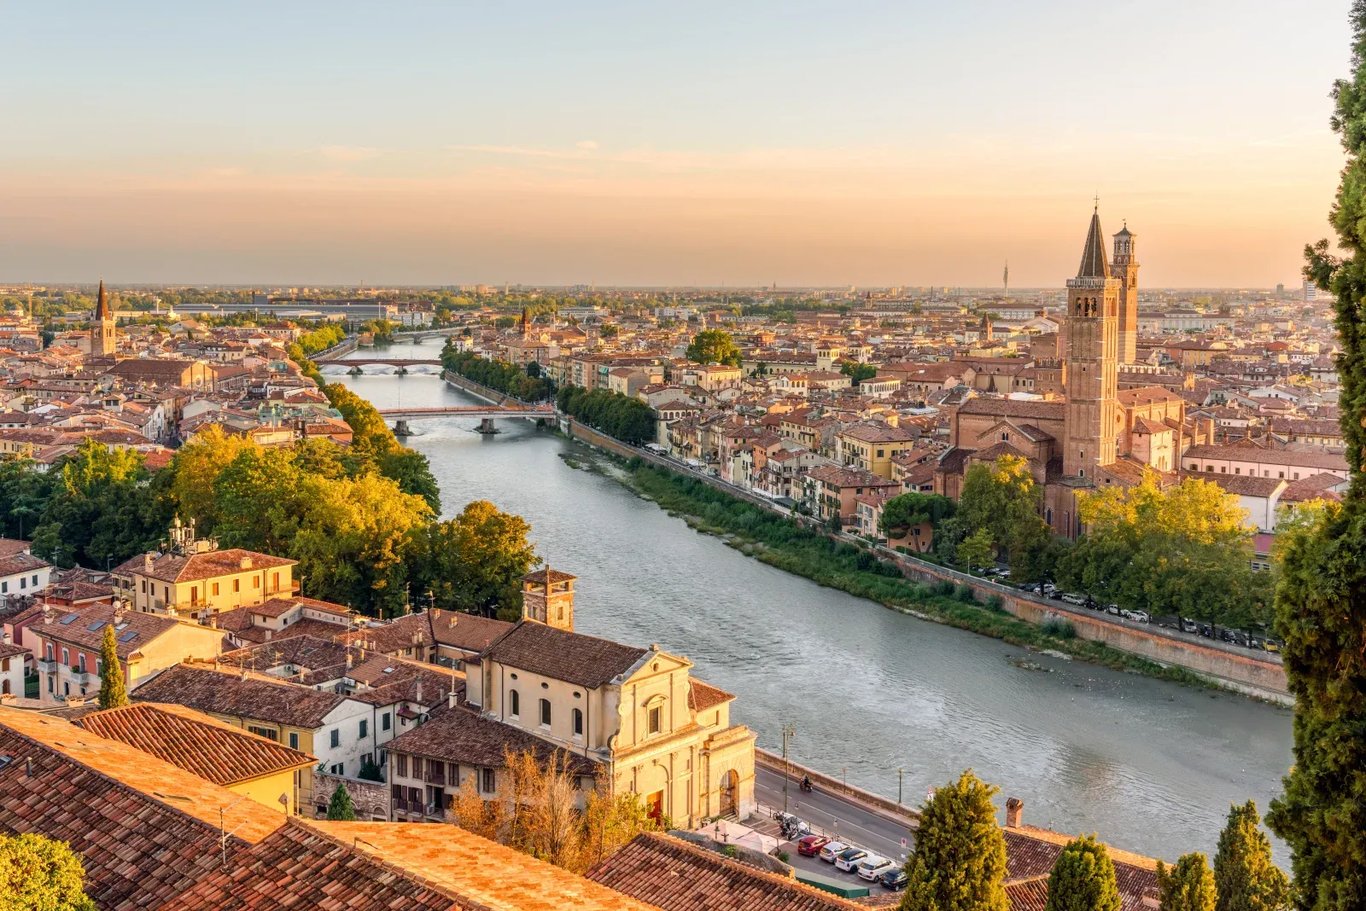 Verona - Top 13 Attractions with Pictures